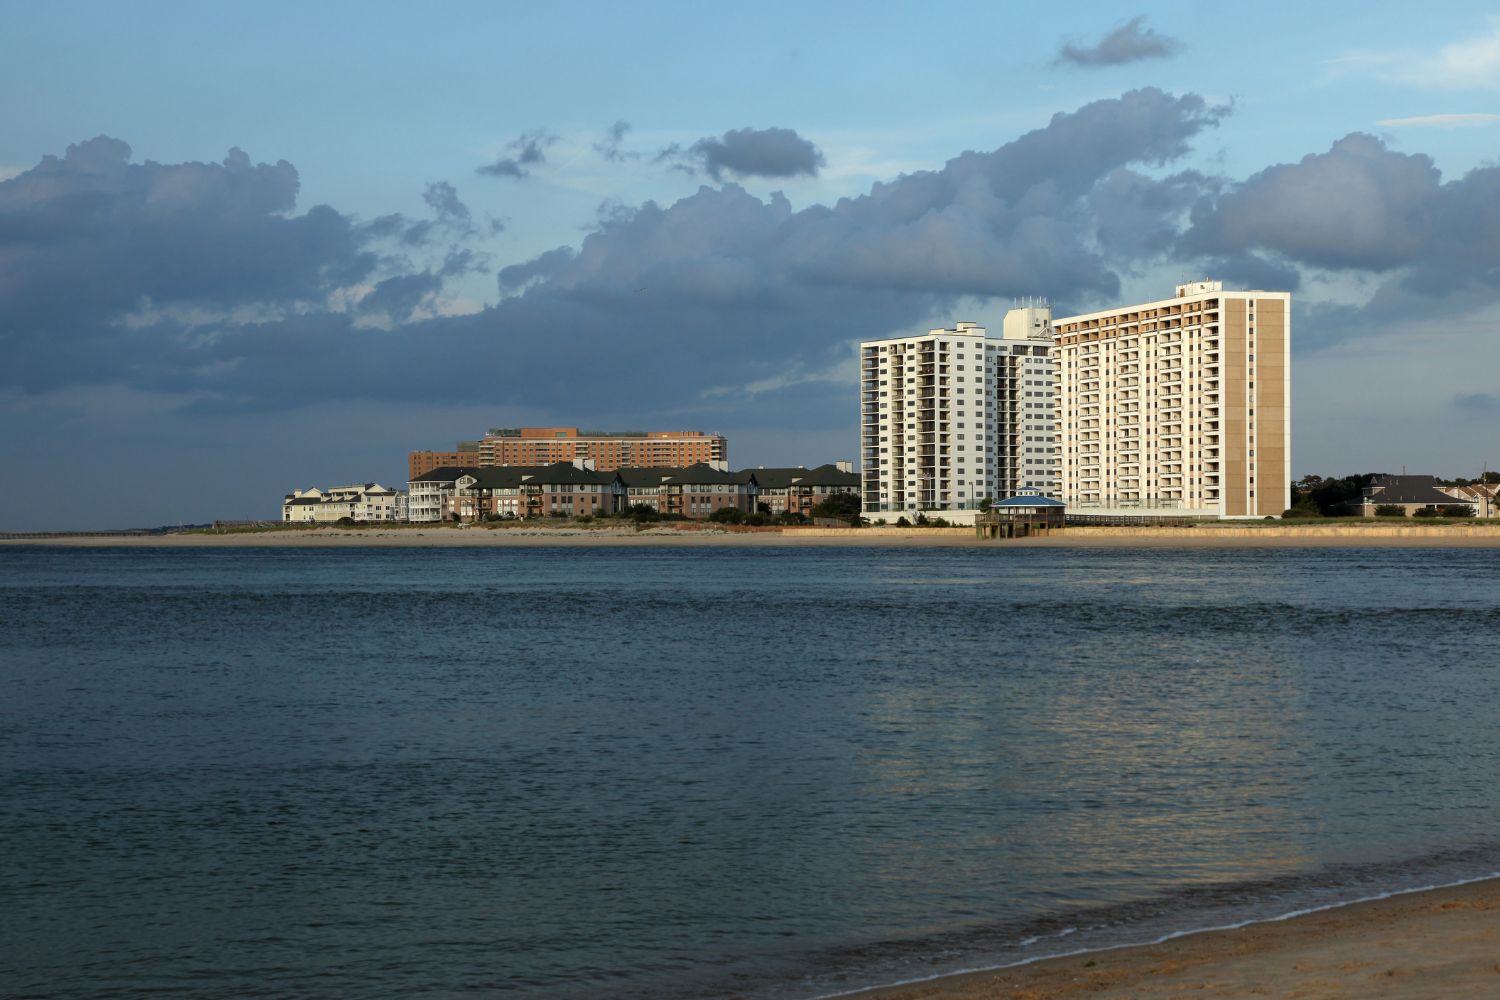 Myrtle Beach oceanfront condos for sale ready to buy